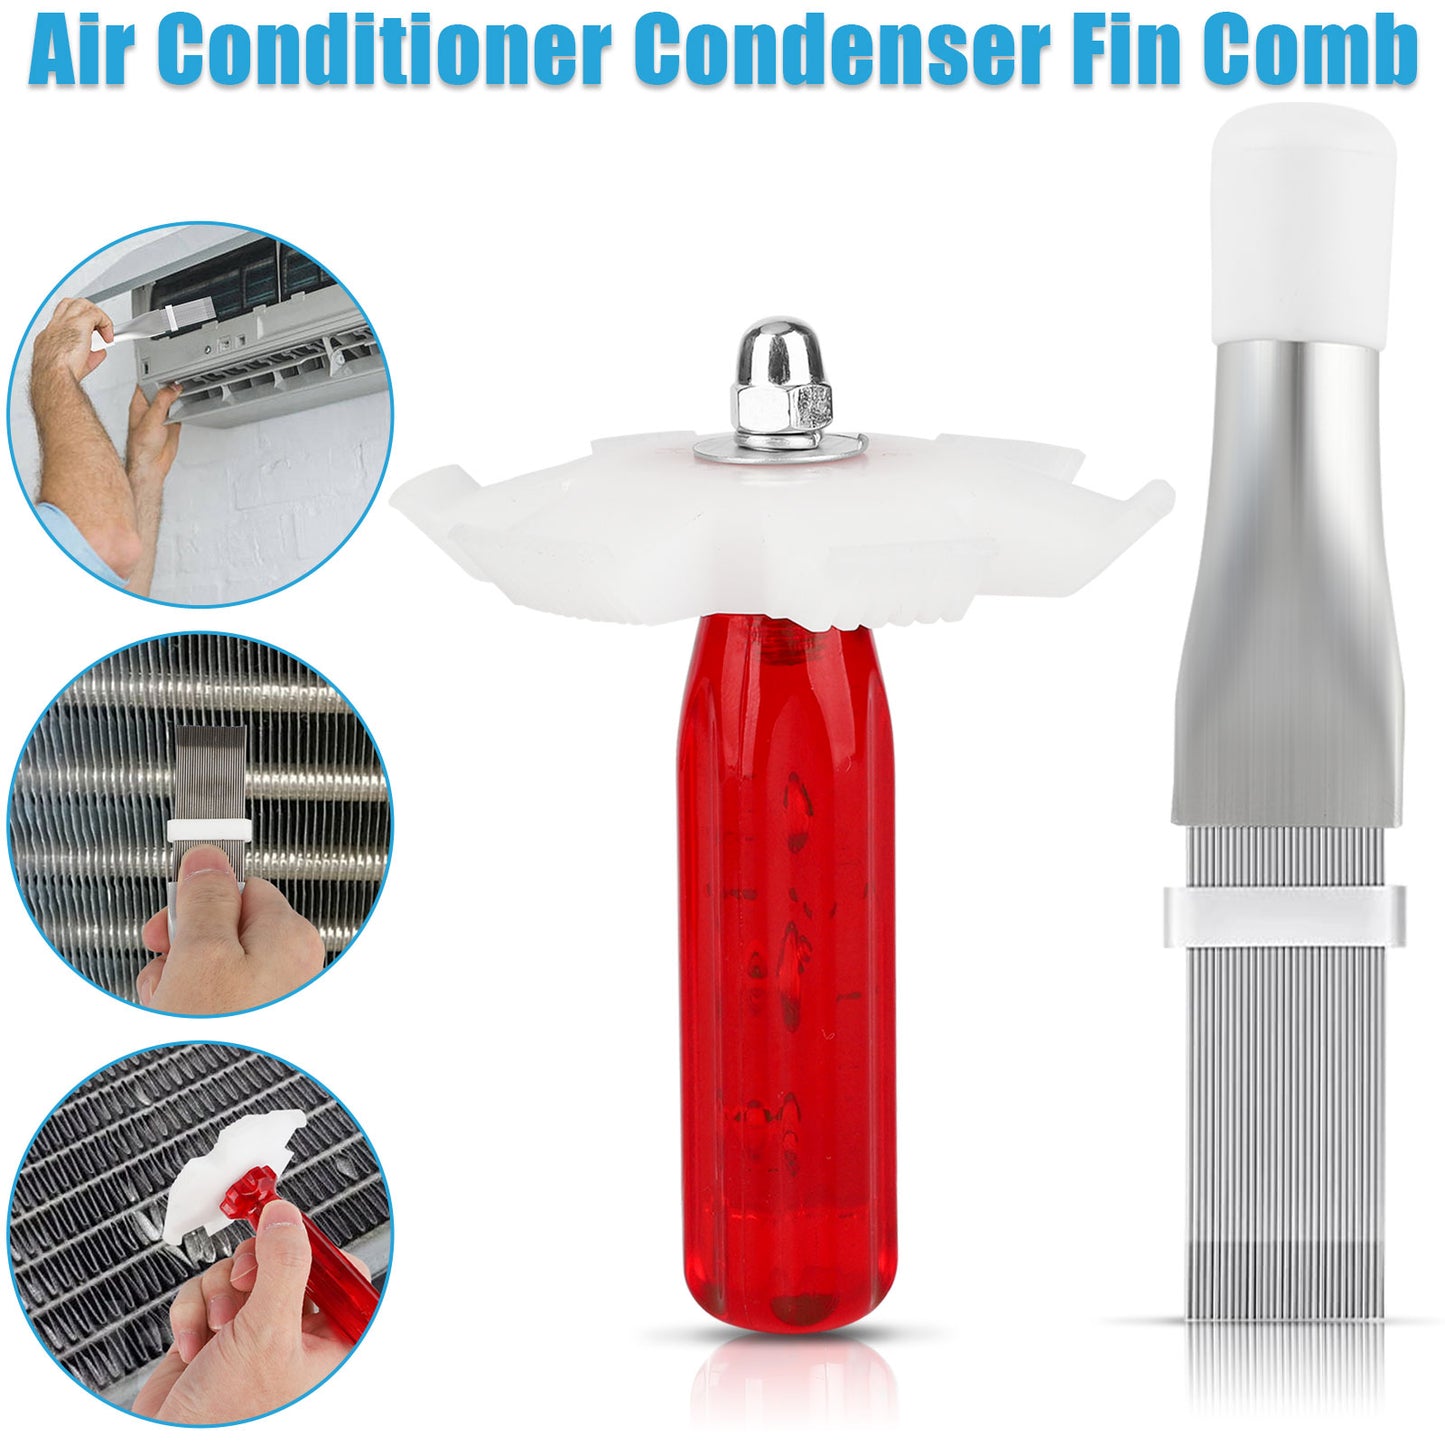 Air Conditioner Cleaning Kit